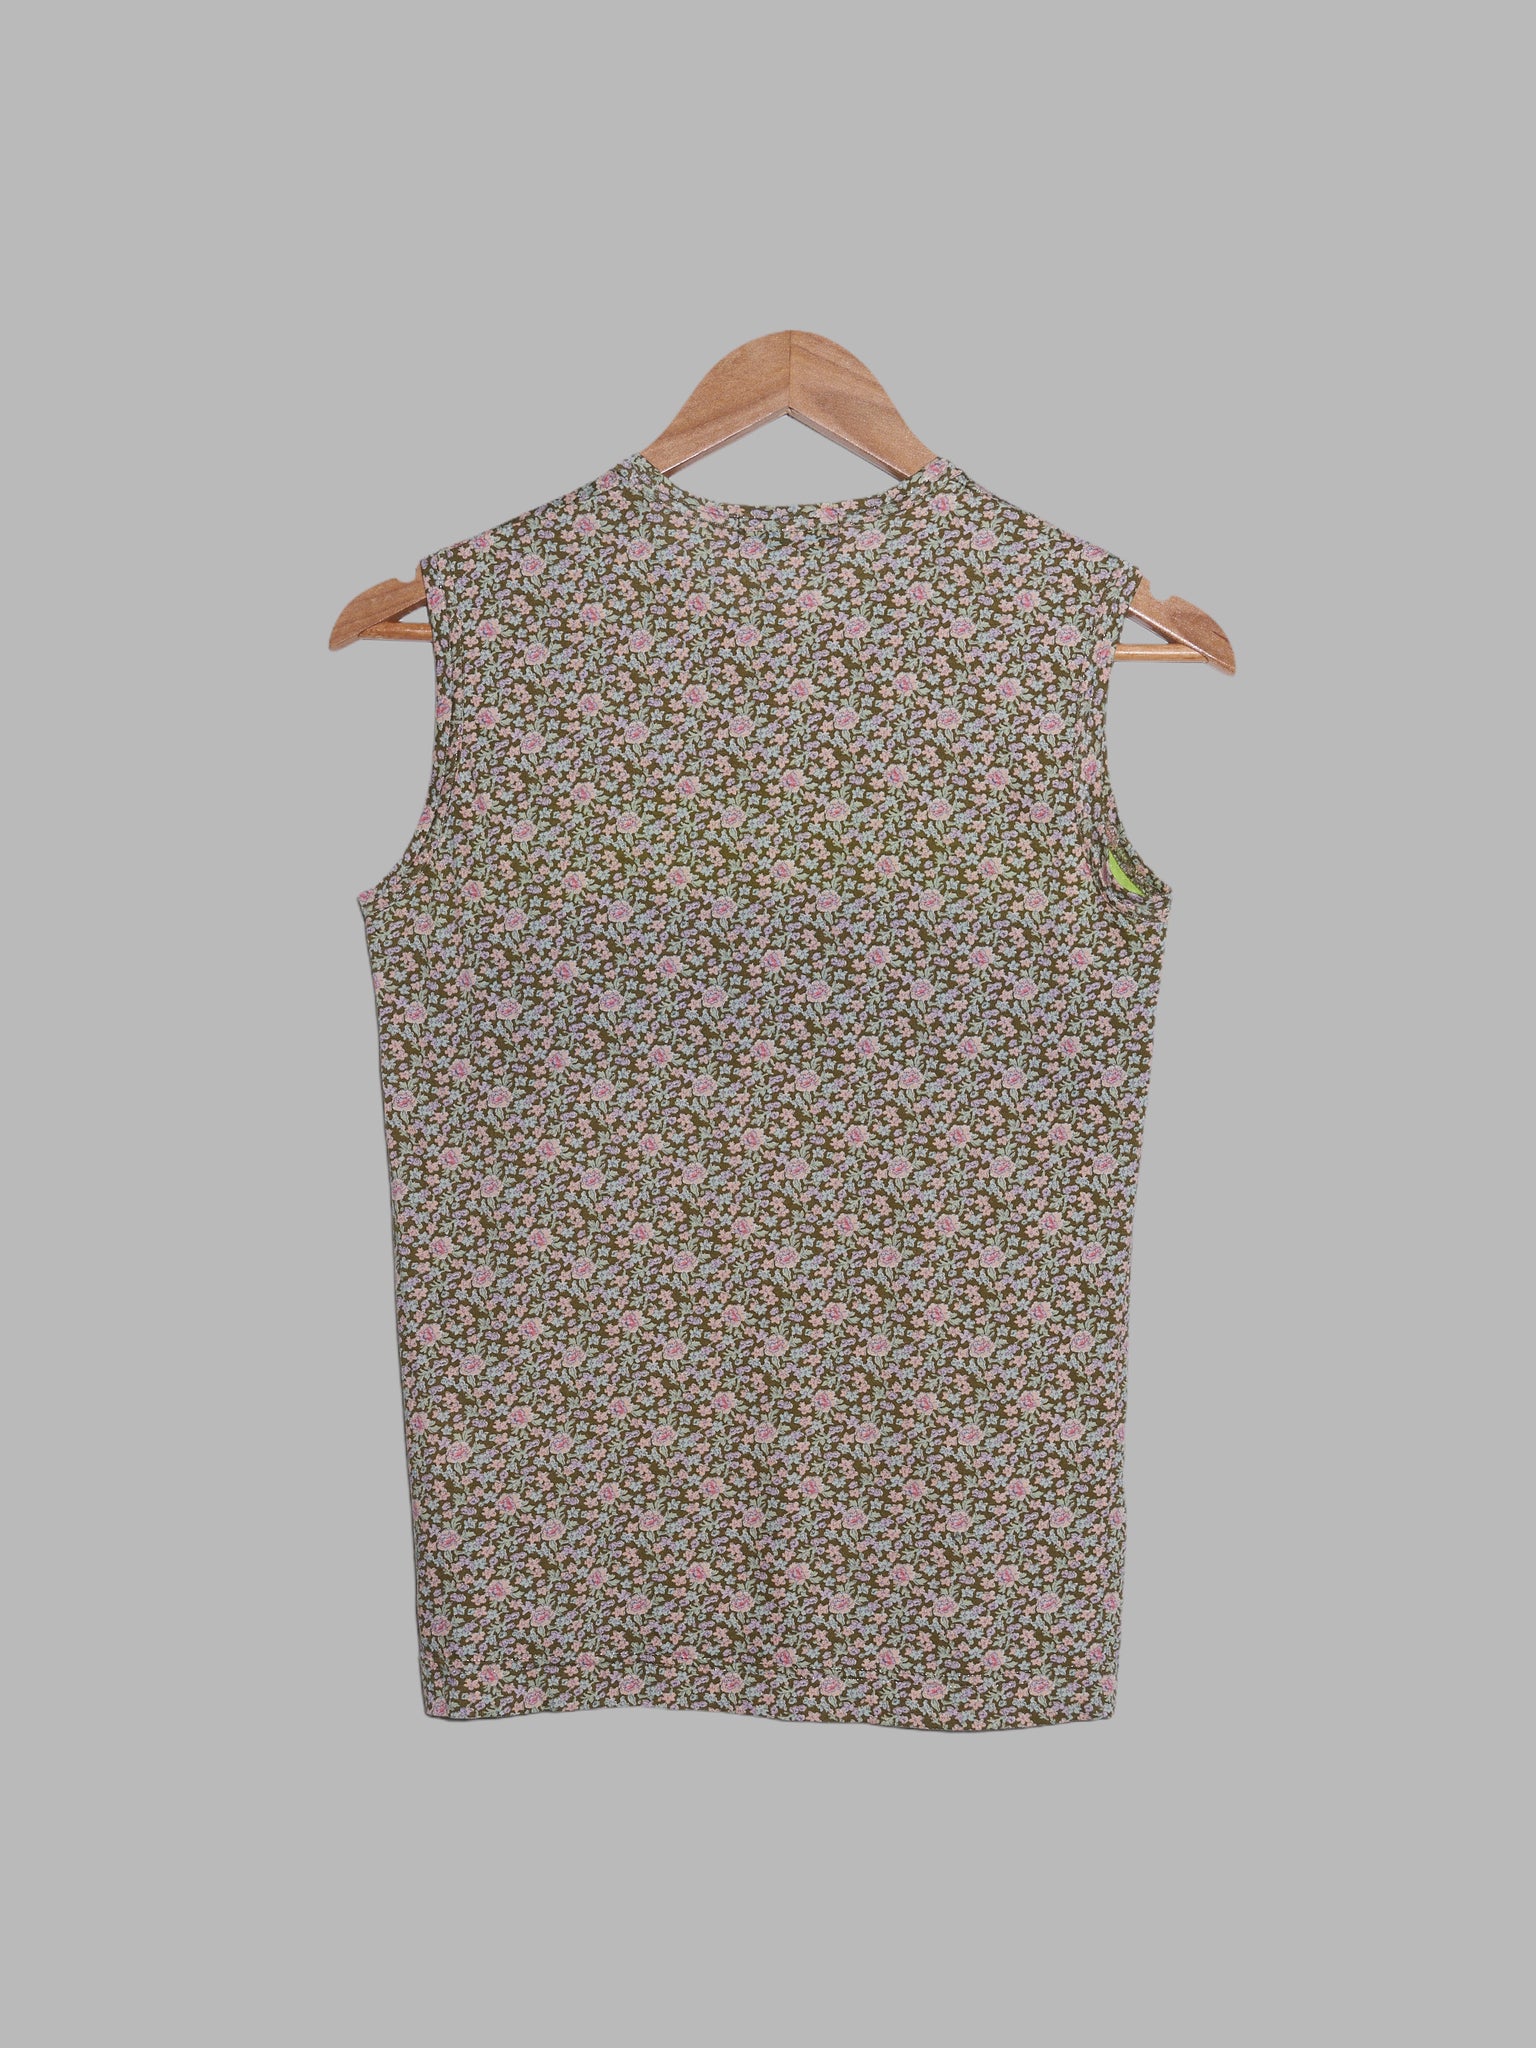 Tricot Comme des Garcons 2007 brown floral tank top with contrast chest panels